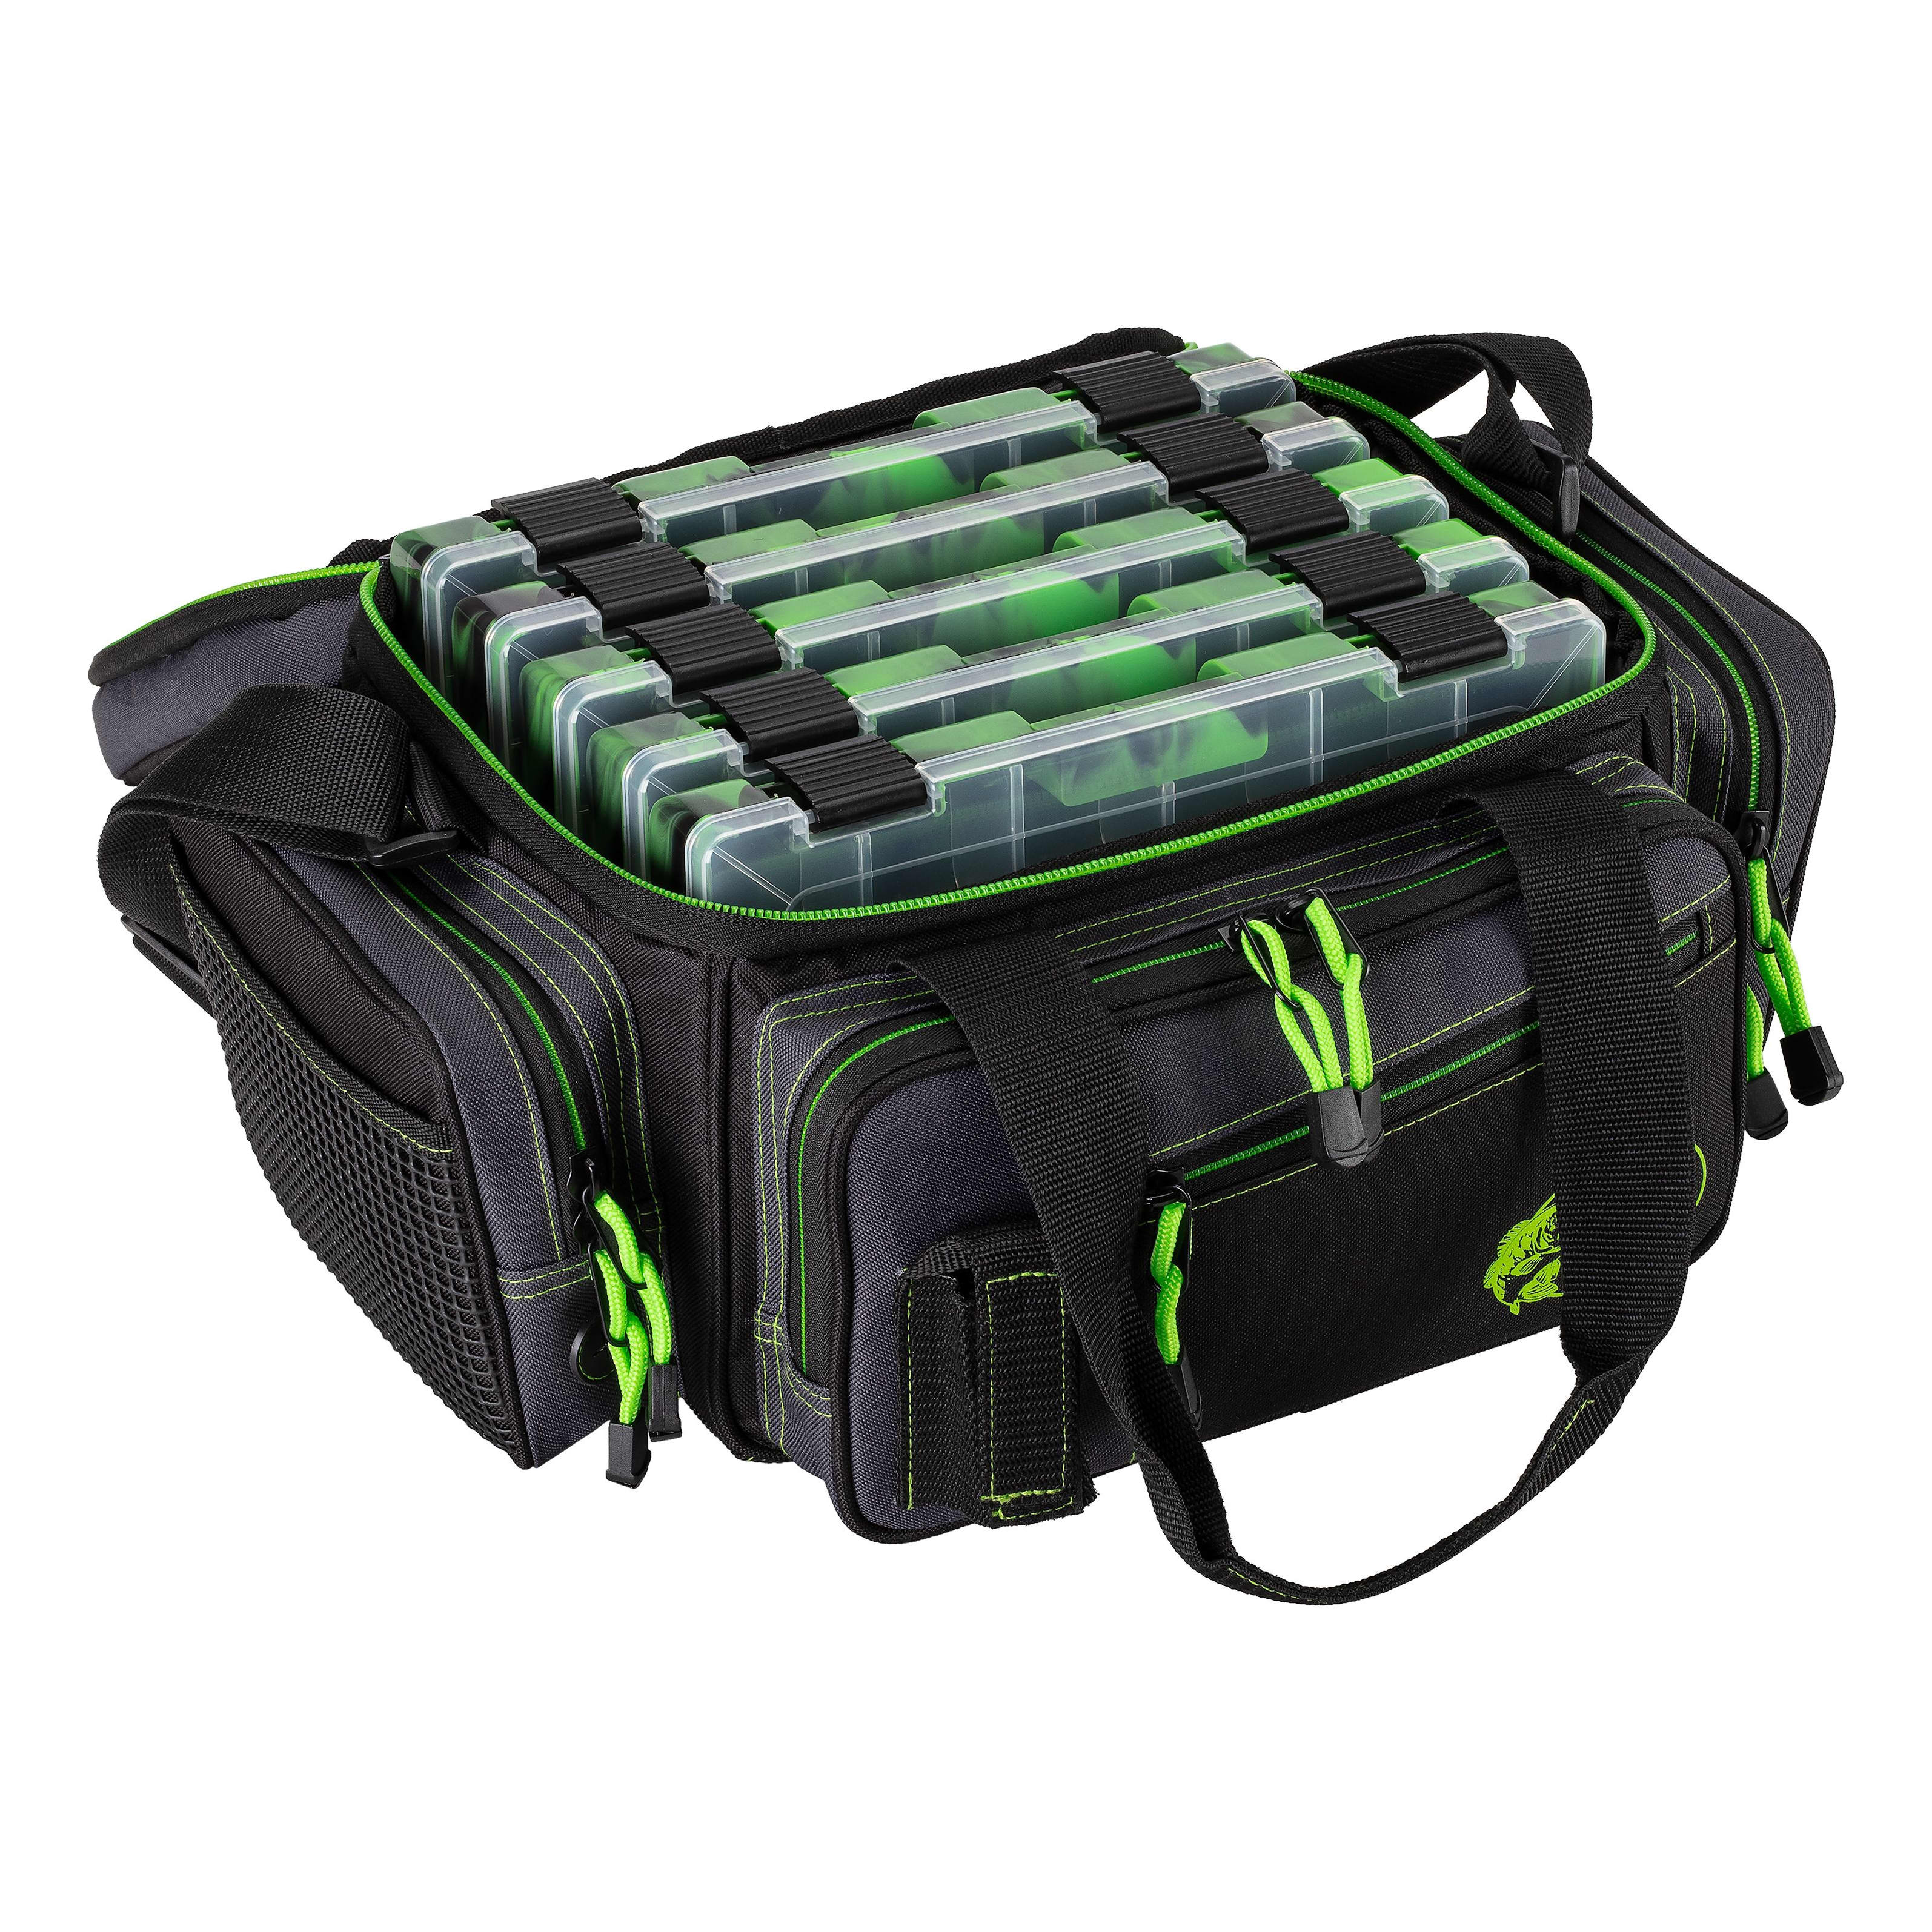  VISMIX Fishing Tackle Bag- Fishing Bag Large Water-Resistant  Fishing Storage Bag with 2pcs 3600 Tackle Tray Boxes and Rod Holder :  Sports & Outdoors